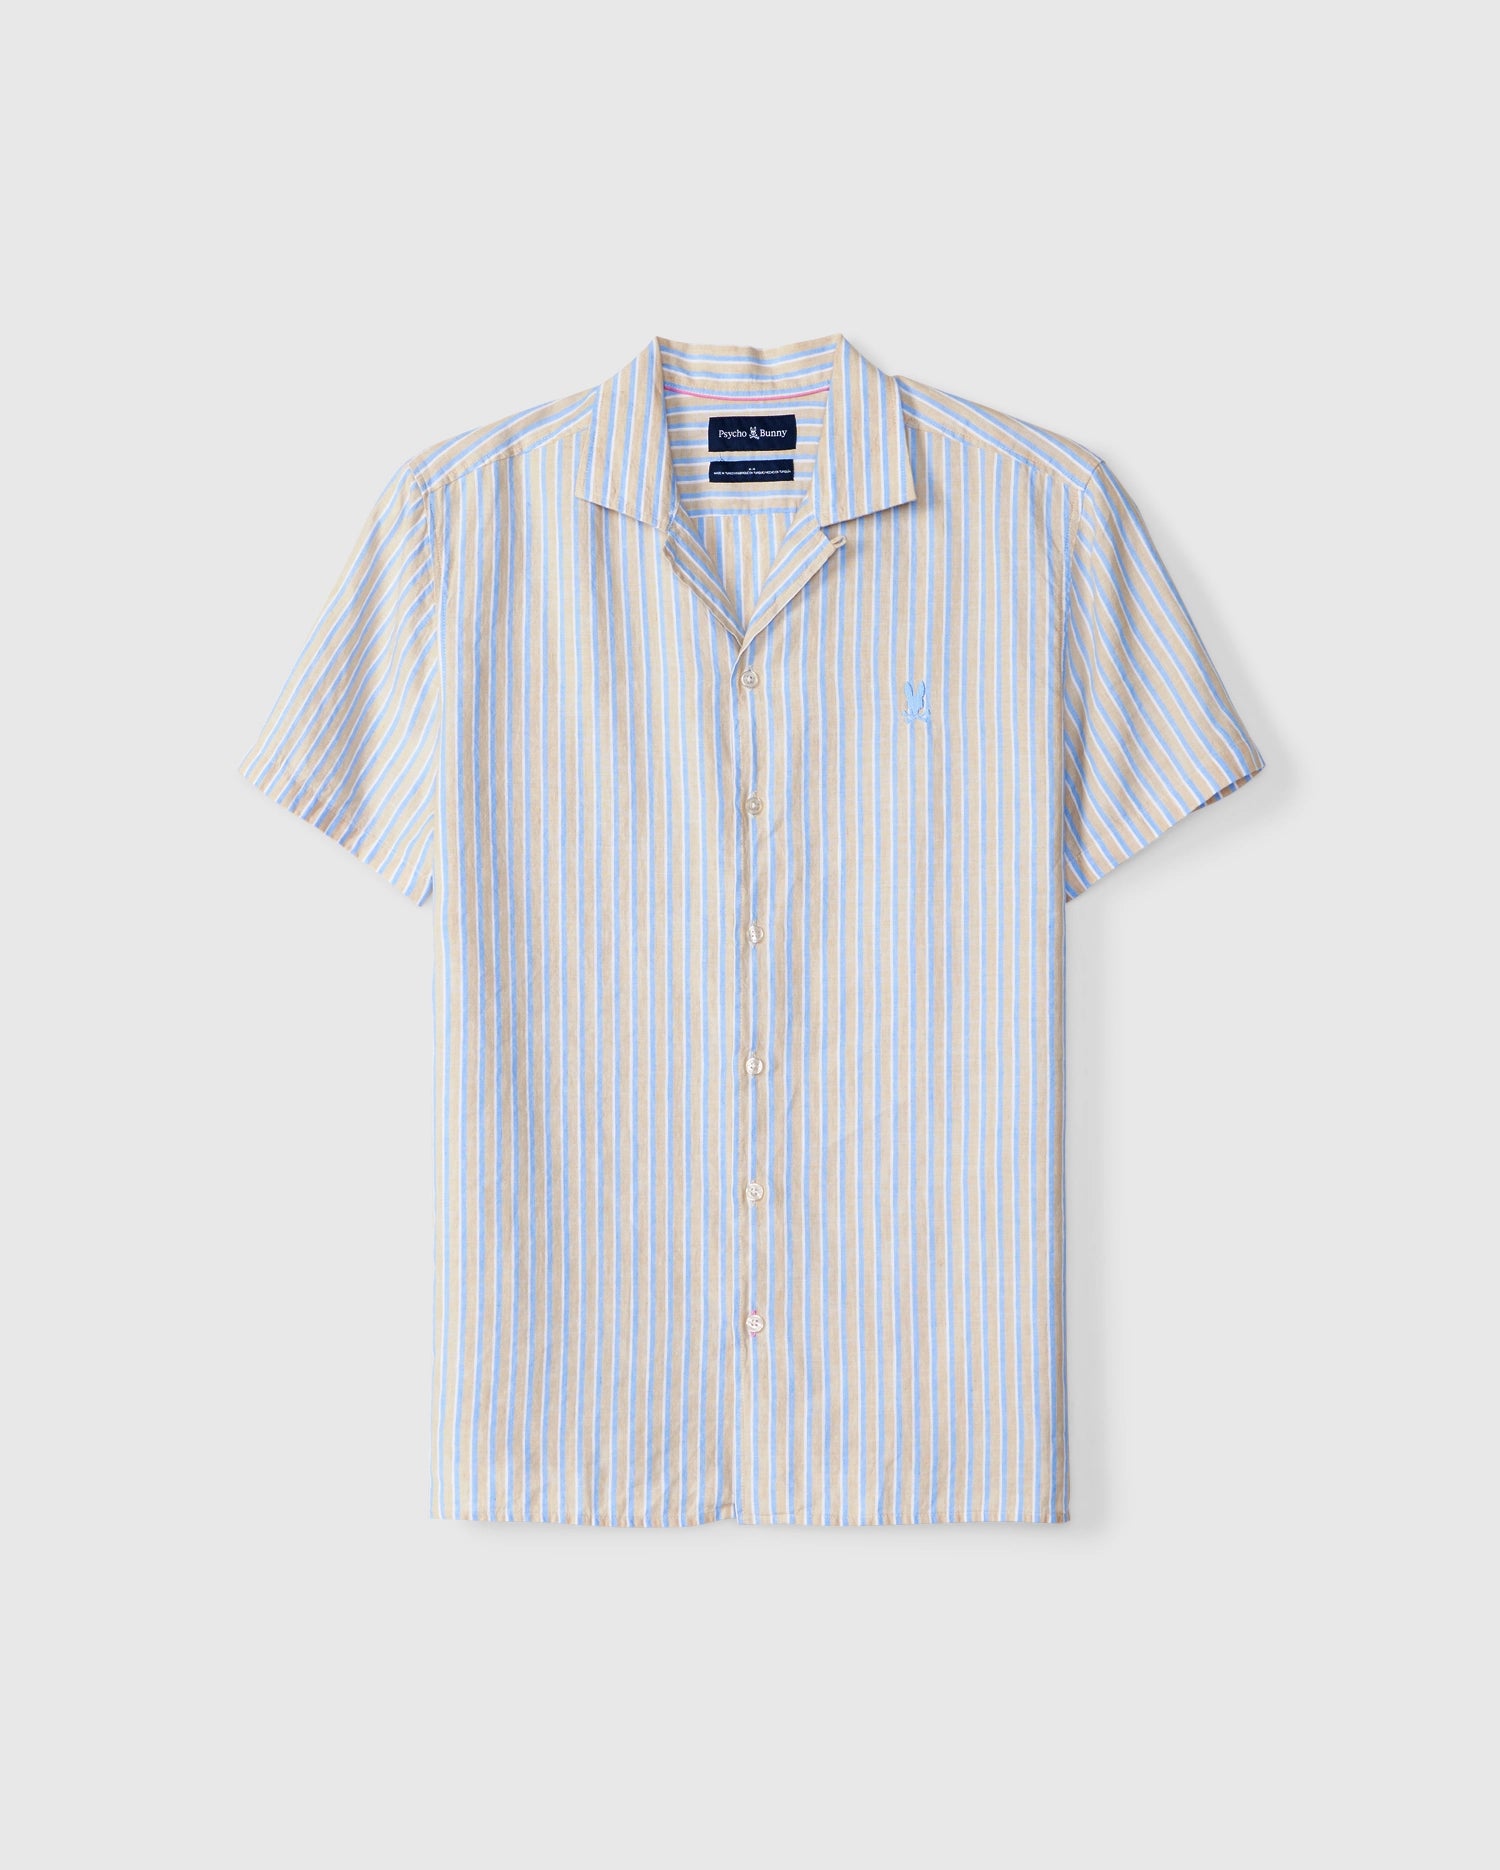 Psycho Bunny MENS JUSTIN LINEN CAMP SHIRT - B6Q585C200 short-sleeved button-up linen shirt with a collar in a vertical stripe pattern of blue, yellow, and white. This men's linen shirt features a small embroidered emblem on the left chest and is displayed on a plain white background.